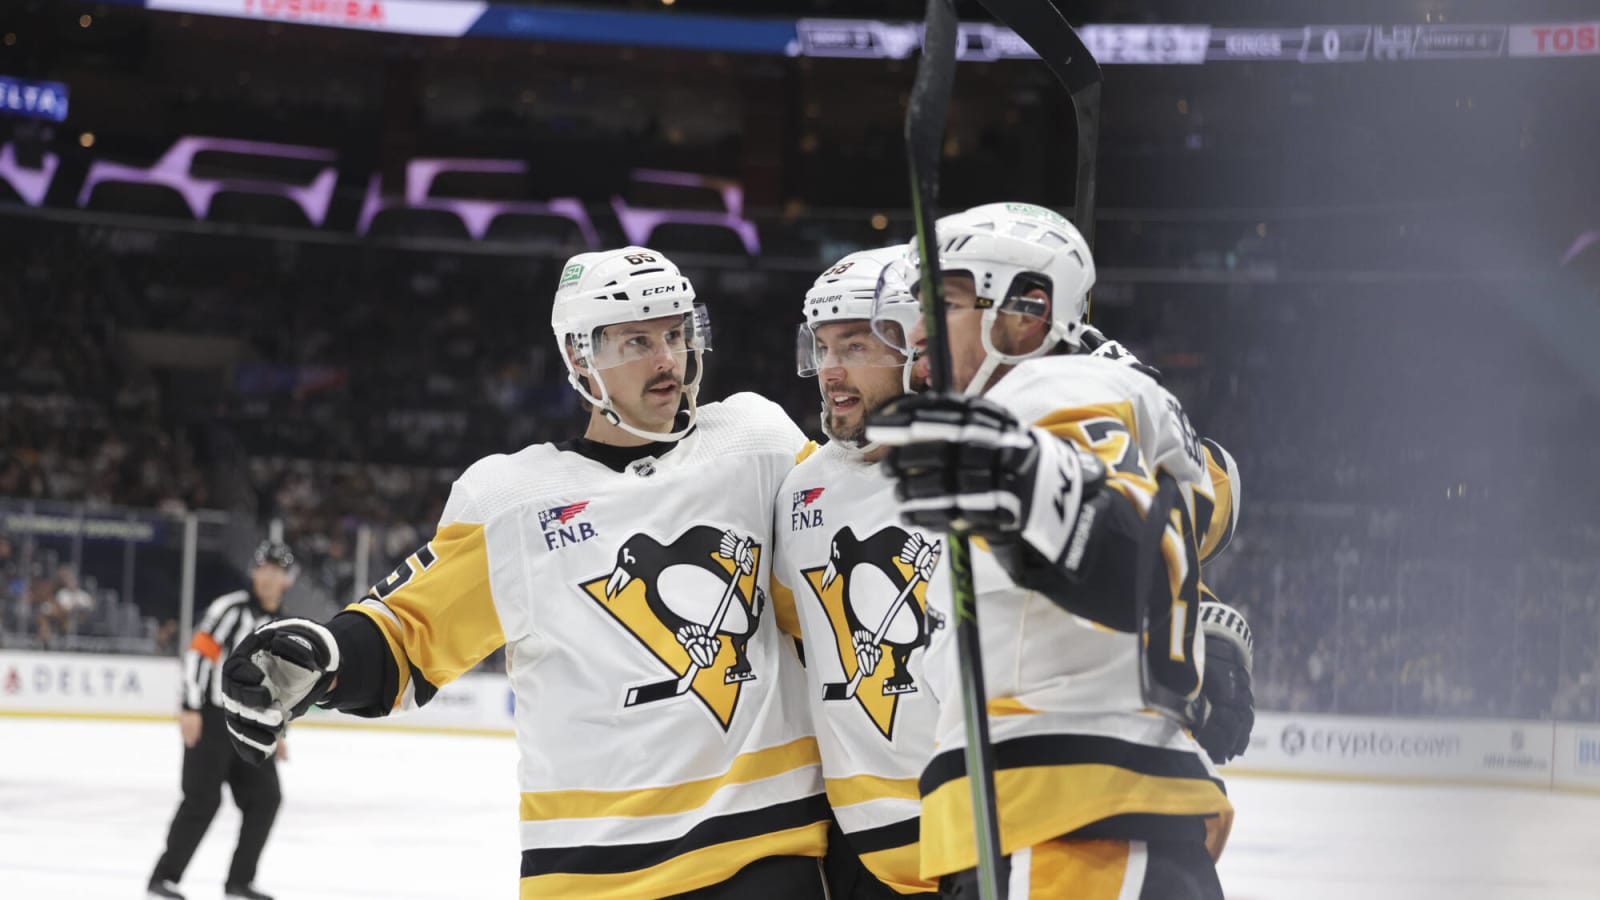 ‘We’re Not 25 Anymore,’ Are the Penguins Finally Getting It?